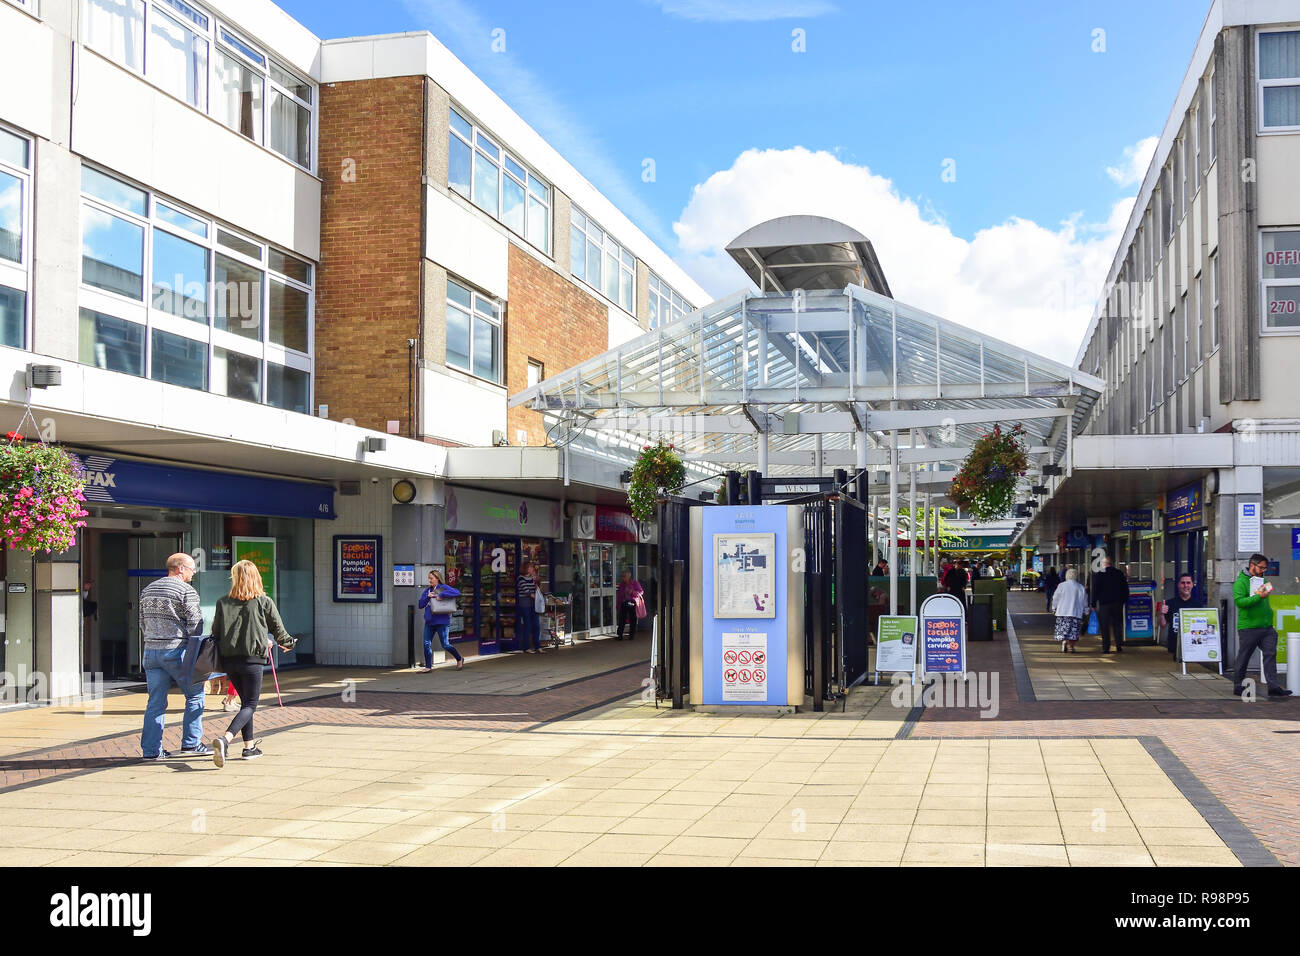 West a piedi, Yate Shopping Centre, Kennedy, Yate, Gloucestershire, England, Regno Unito Foto Stock